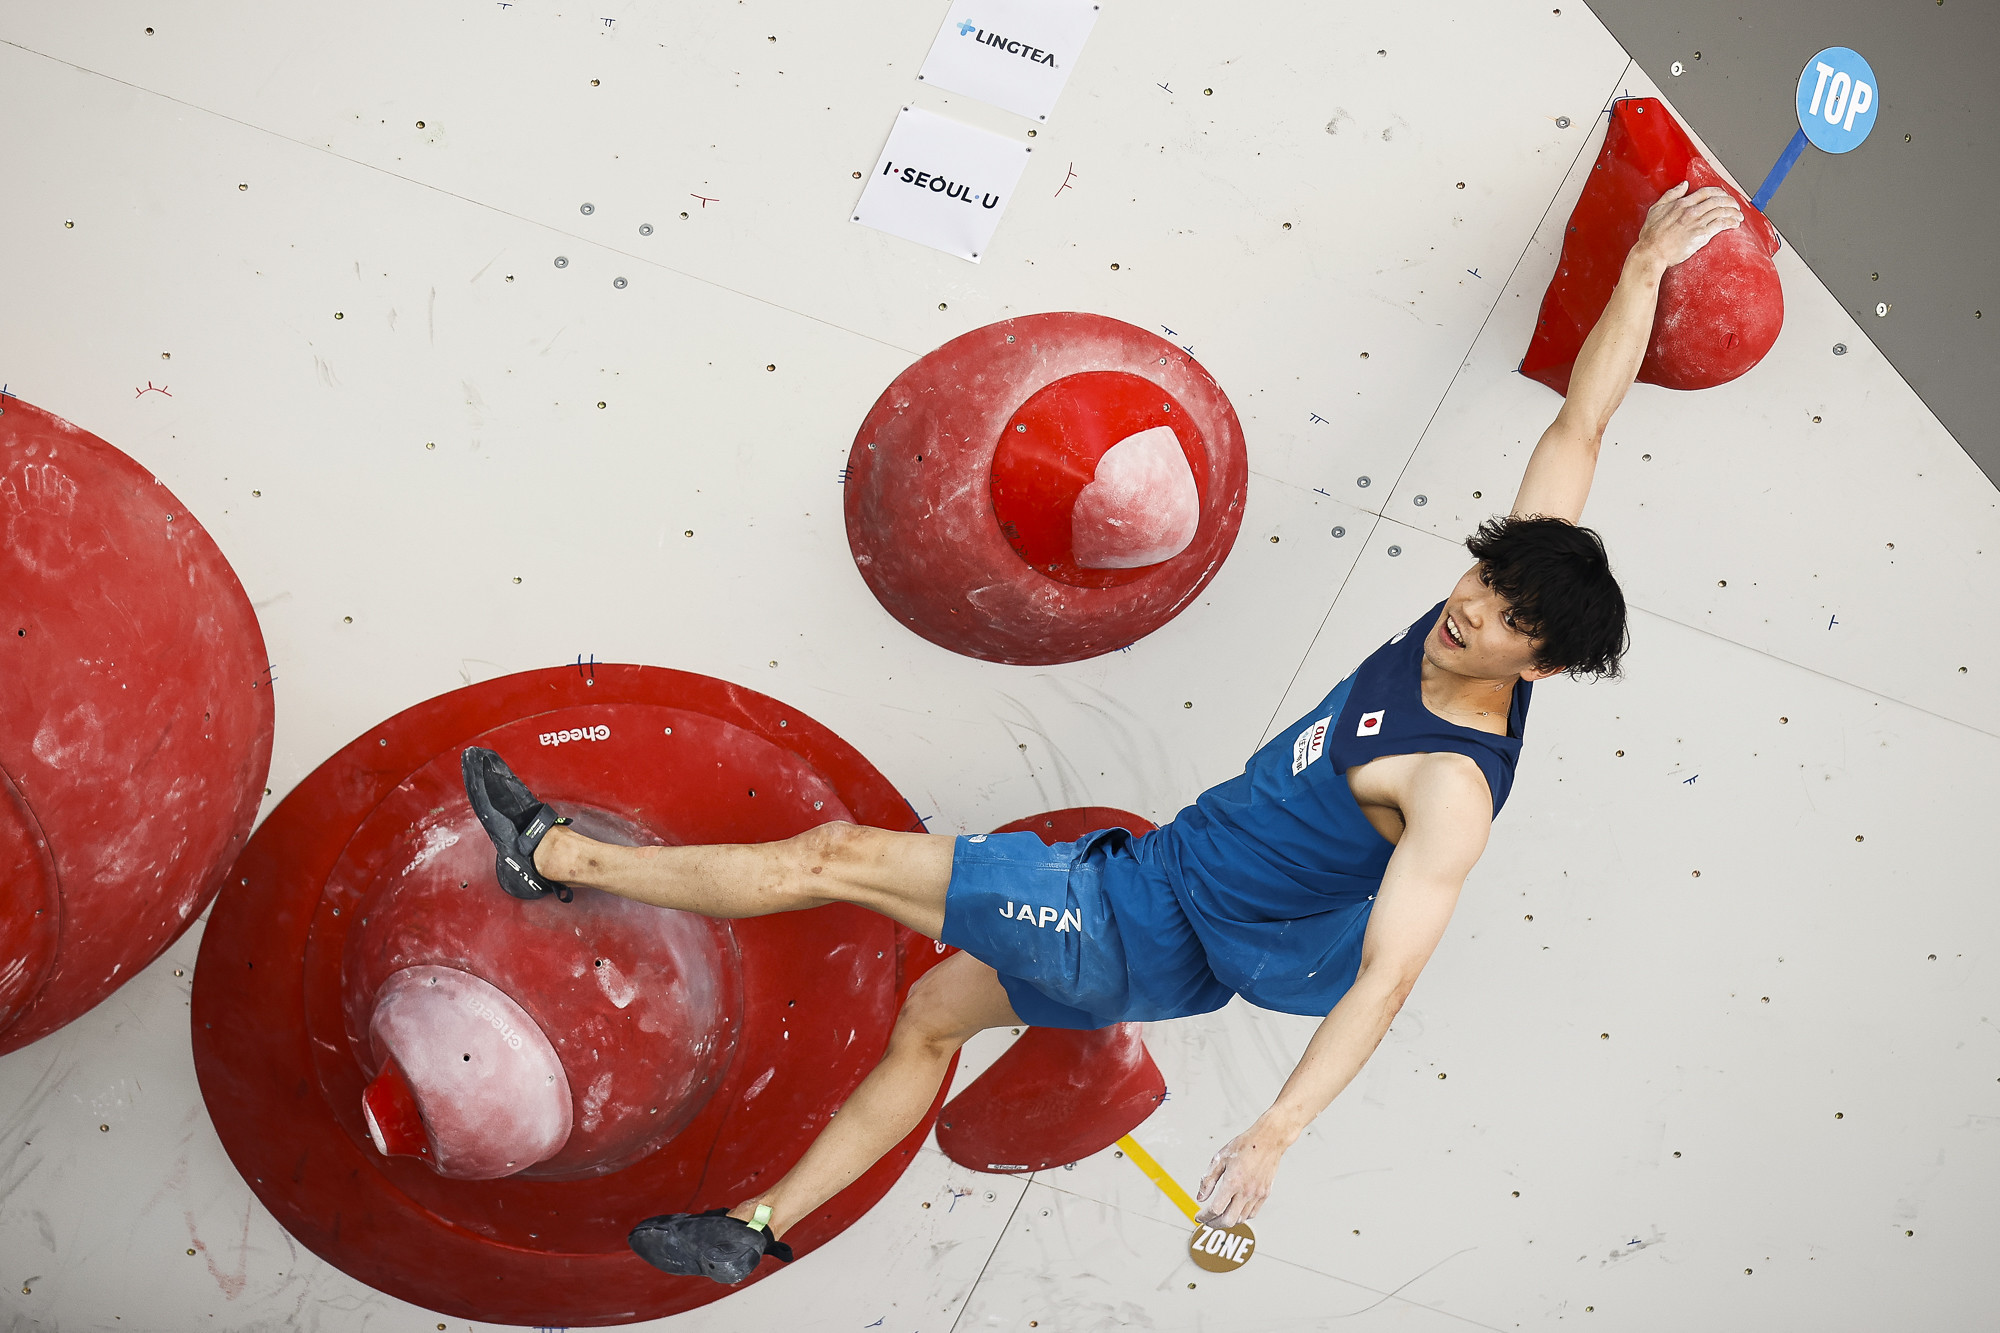 Kokoro Fujii was among eight Japanese climbers in the top 20 of the men's boulder qualification round in Seoul ©Dimitris Tosidis/IFSC